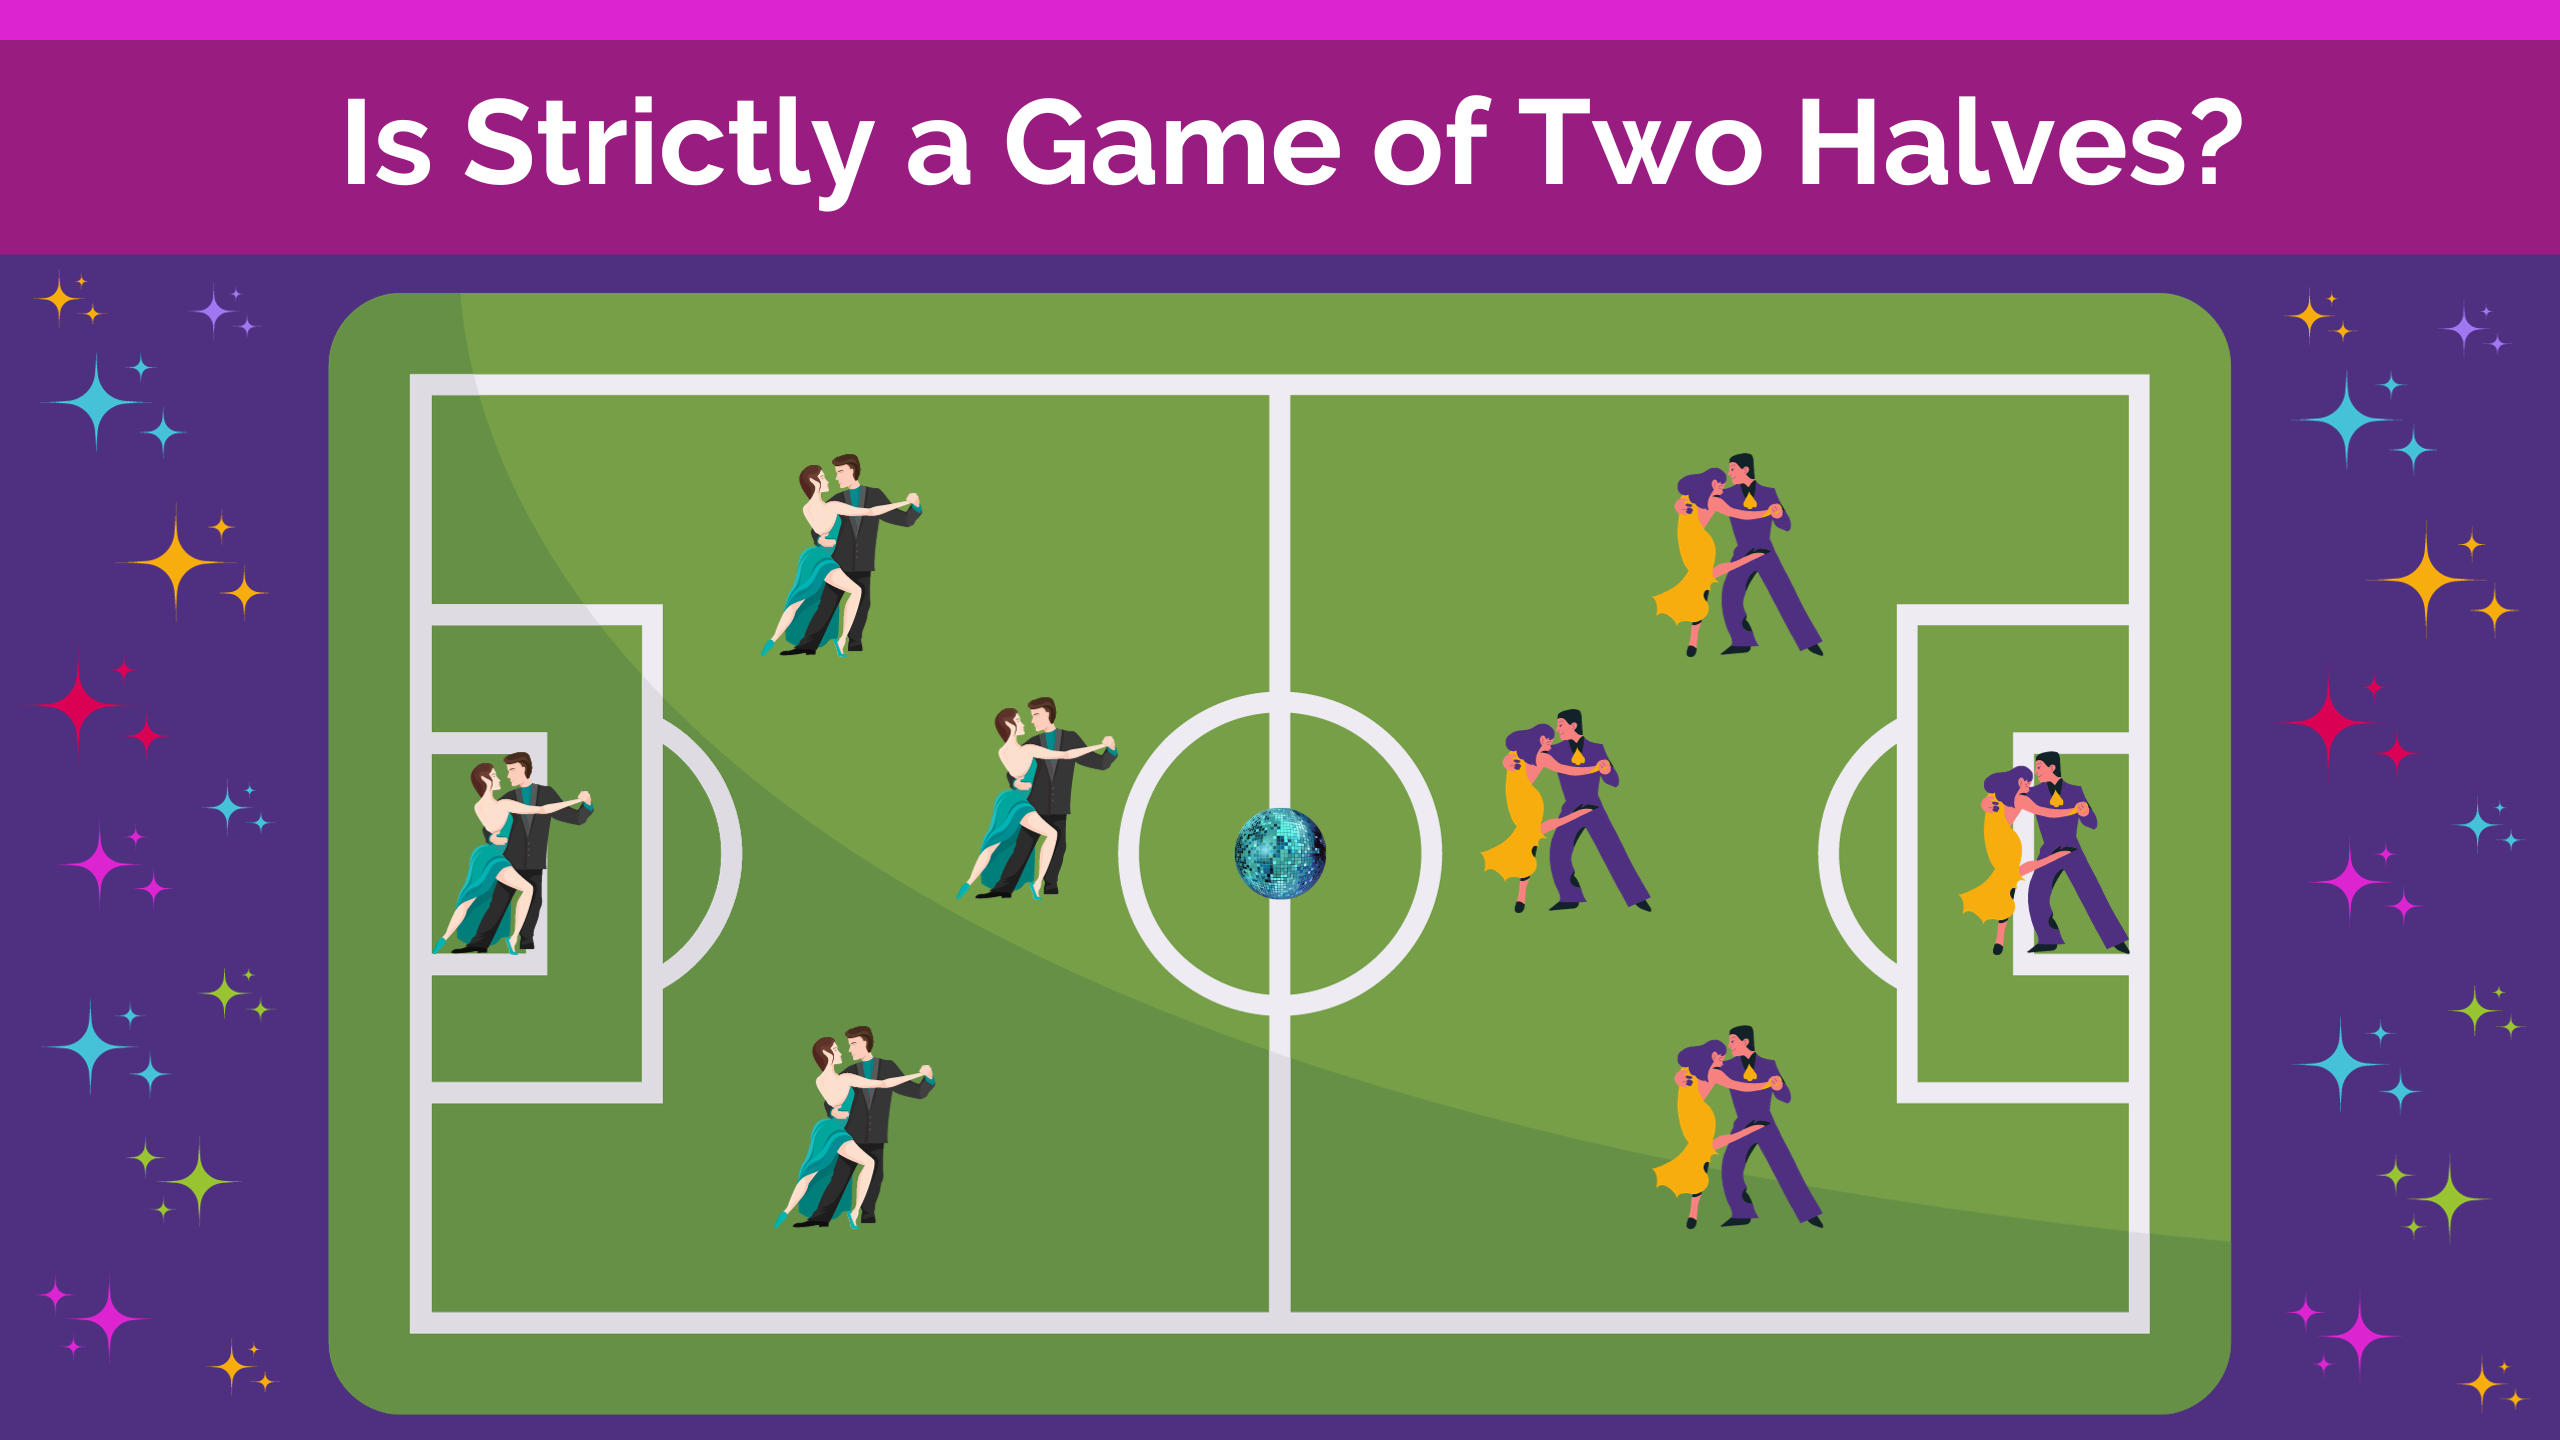 Is Strictly a game of two halves?